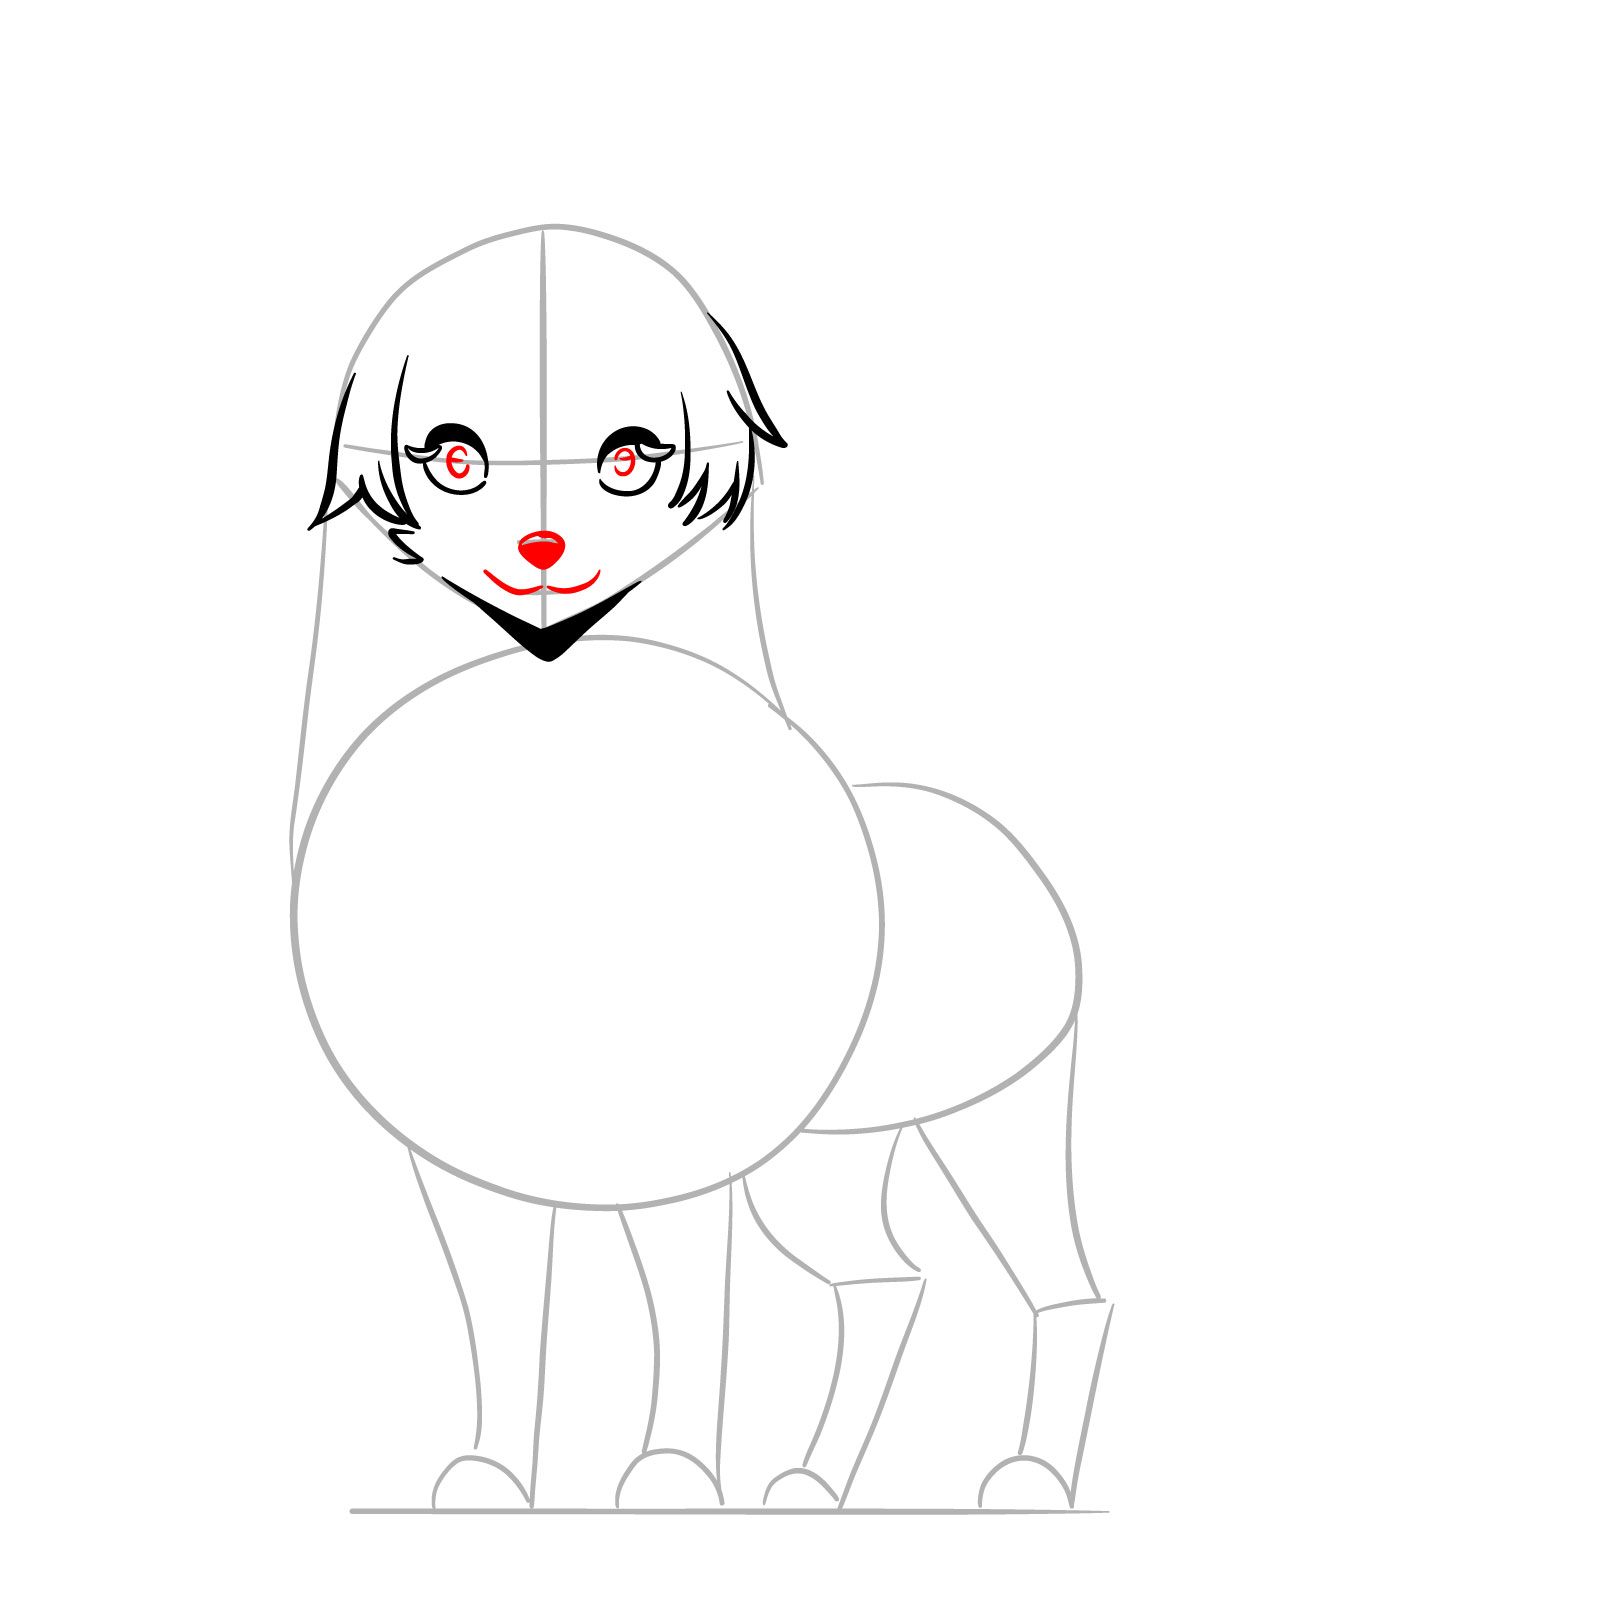 Adding facial features to the anime wolf sketch - step 05